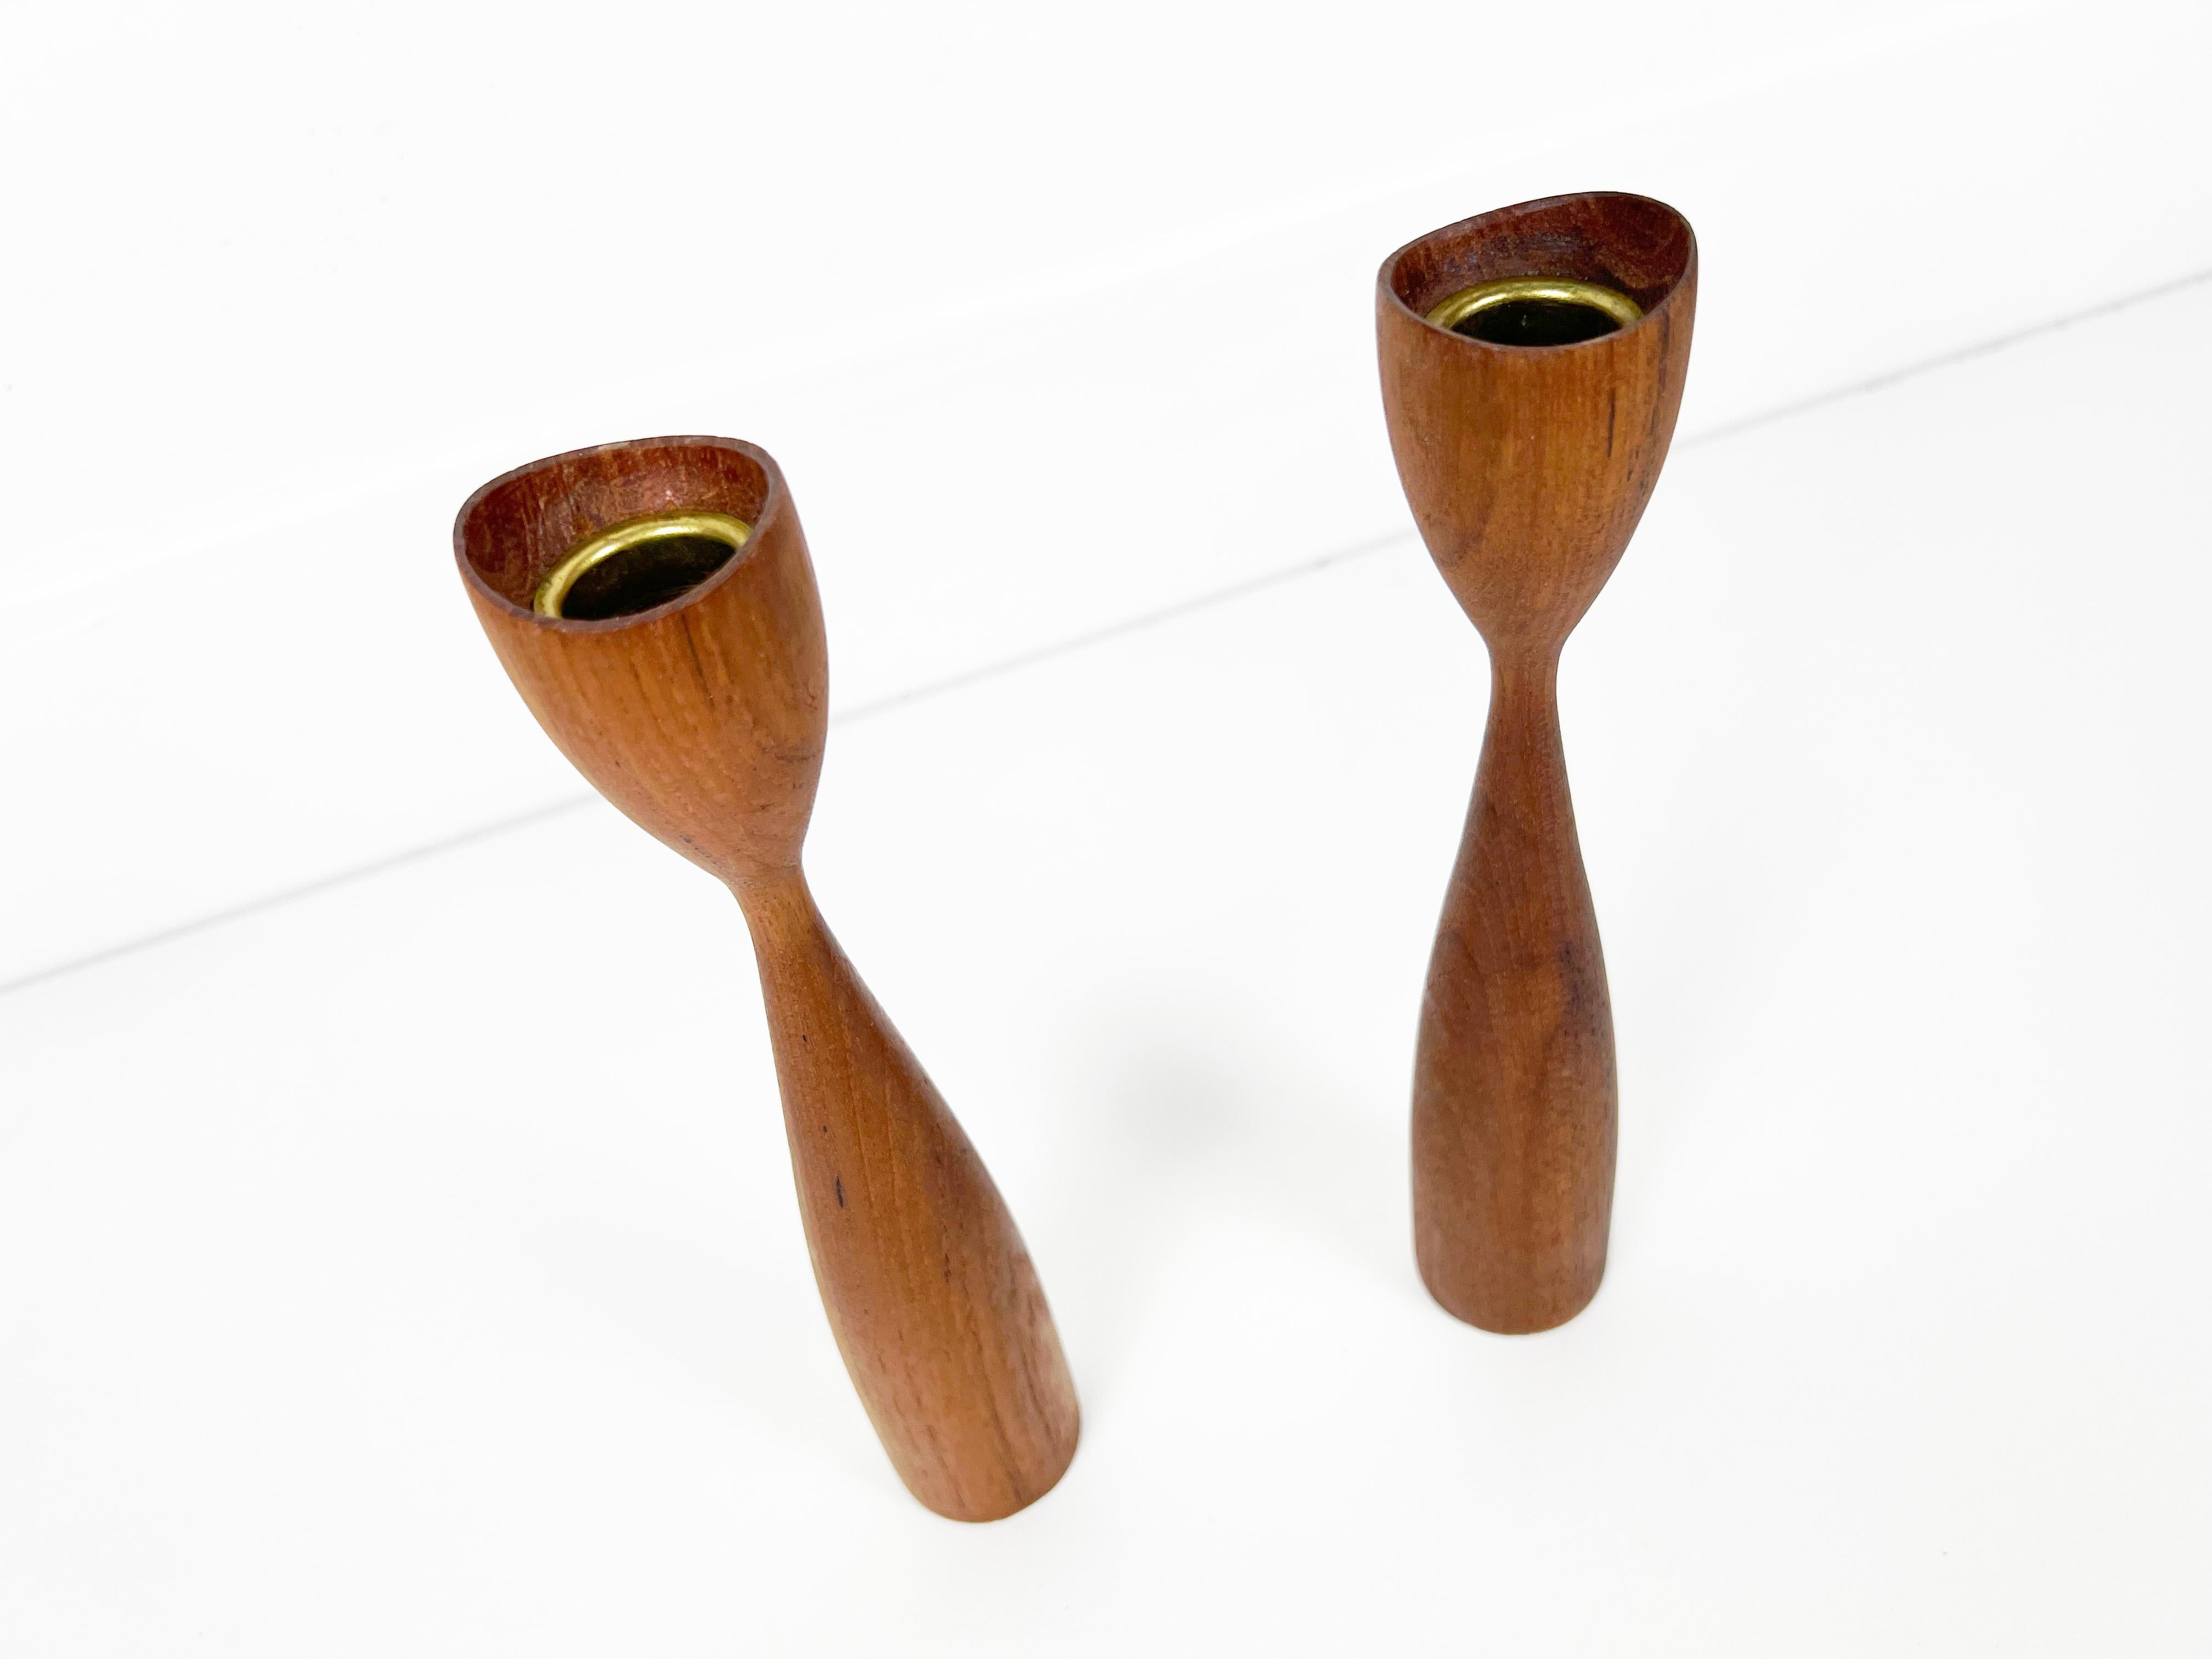 Pair of vintage Scandinavian sculptural candleholders with asymmetric tops. Lathe turned from solid teak with brass candle holder inserts. 

Origin: Denmark

Year: 1960s

Style: Mid Century Modern / Danish Modern / Scandinavian

Dimensions: